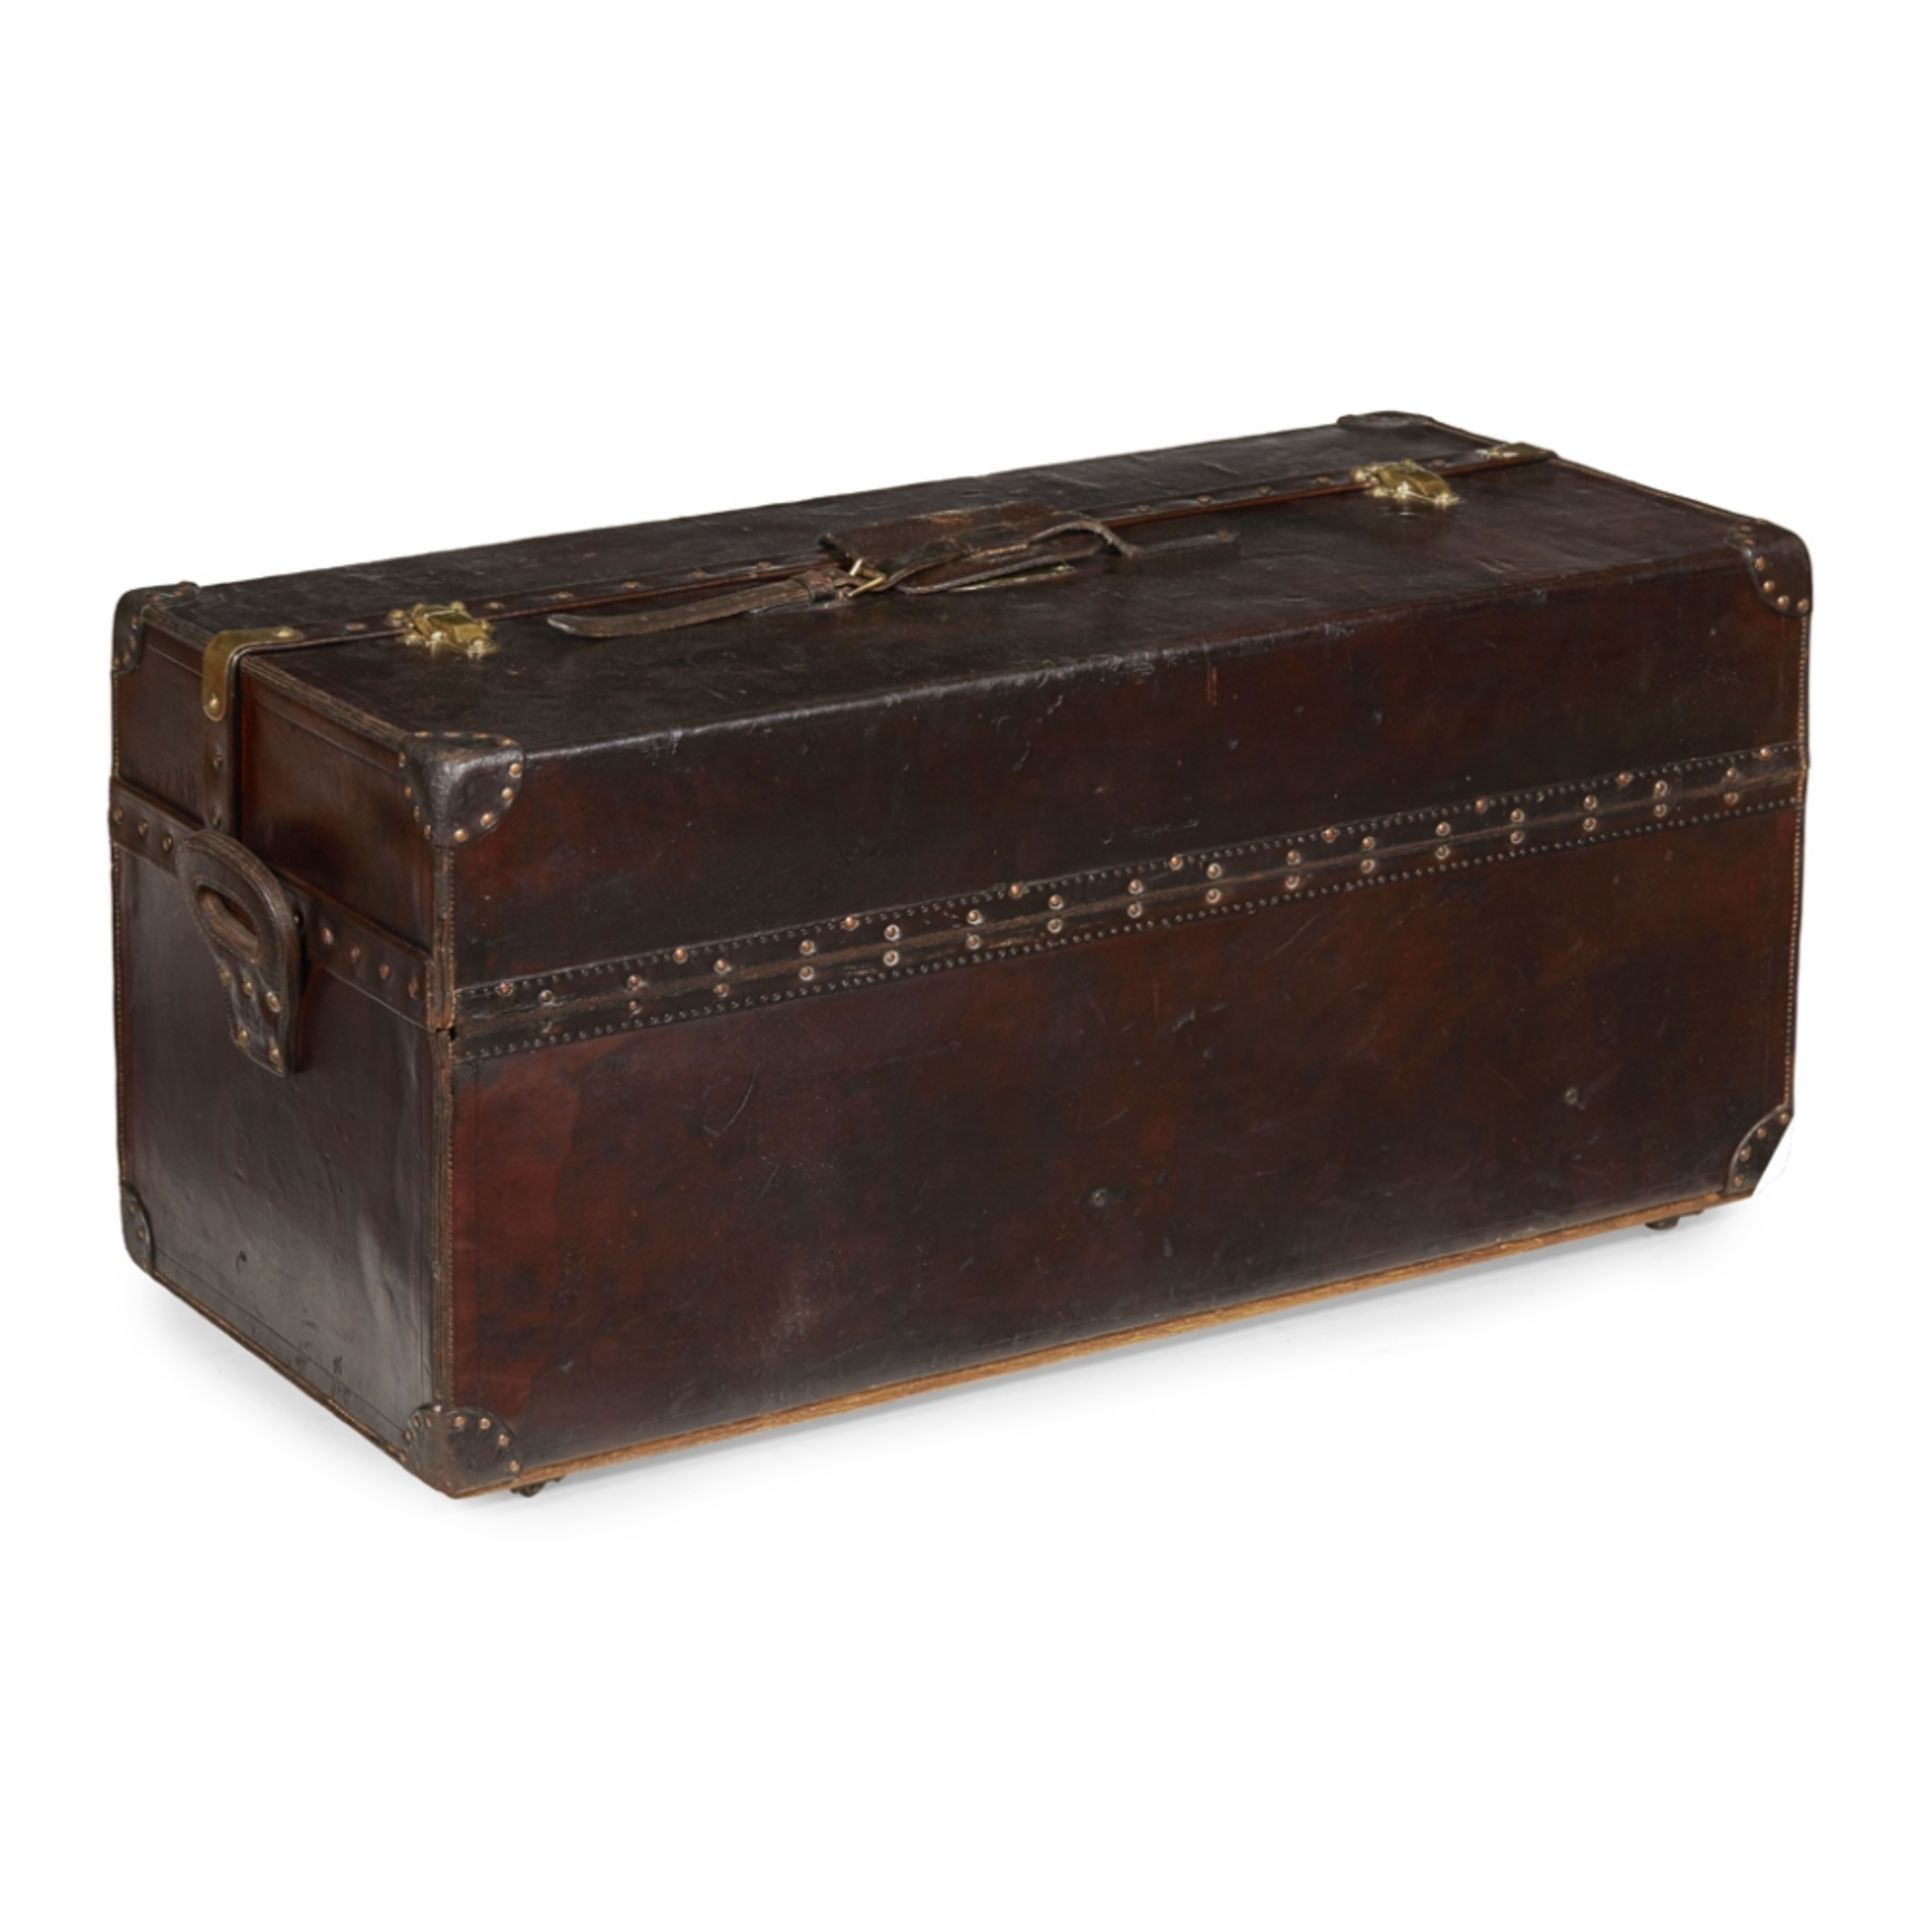 Louis Vuitton leather 'ideal' trunkLate 19th century, covered in dark brown leather with leather